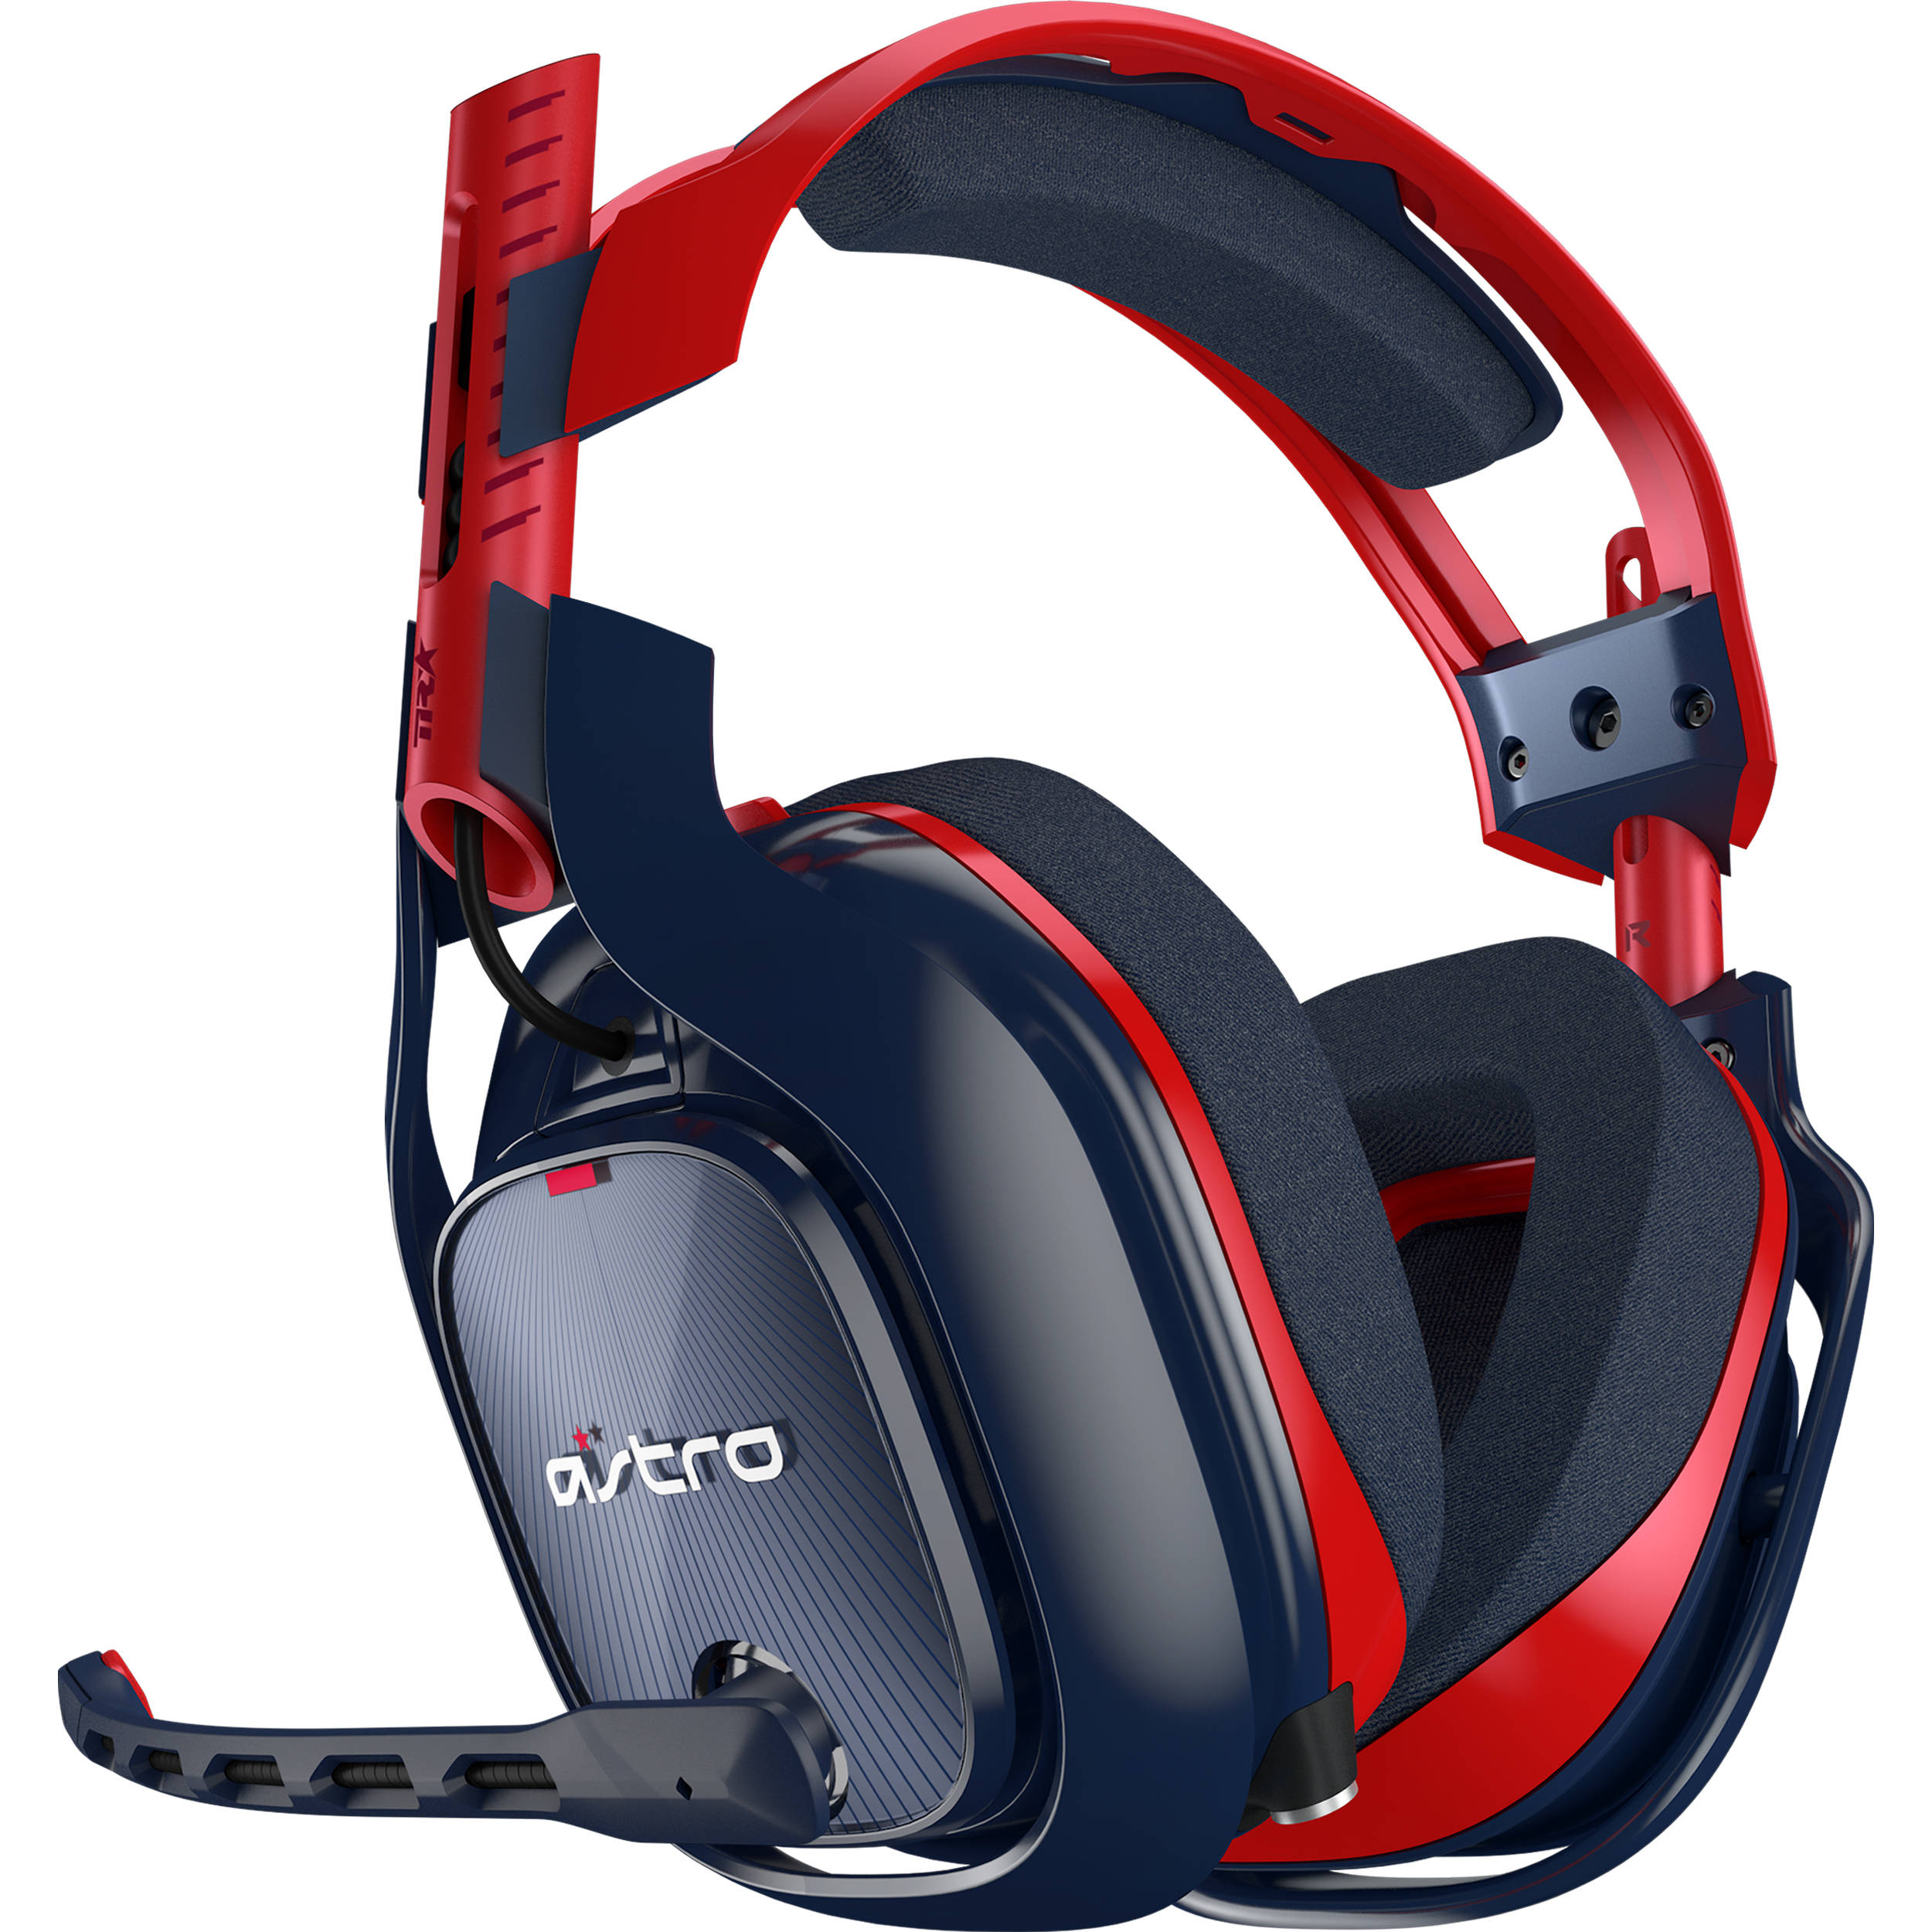 Astro Gaming 0 Tr Gaming Headset 939 B H Photo Video